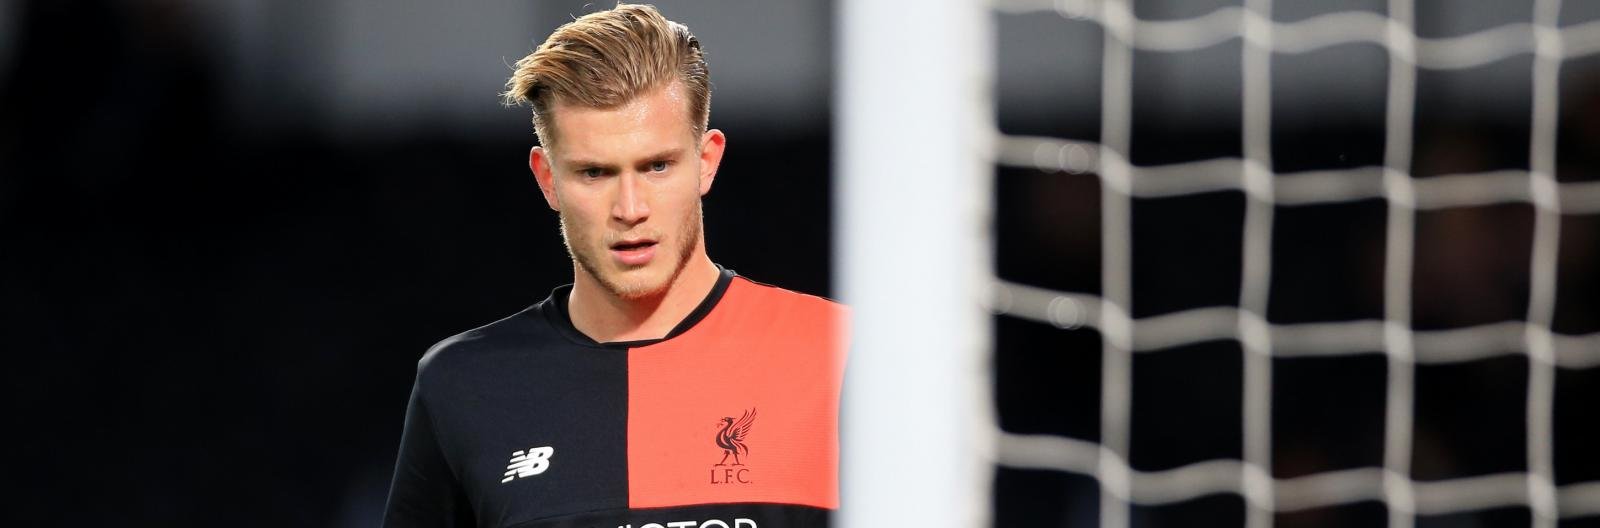 Karius or Mignolet? Who should take Liverpool’s number one jersey